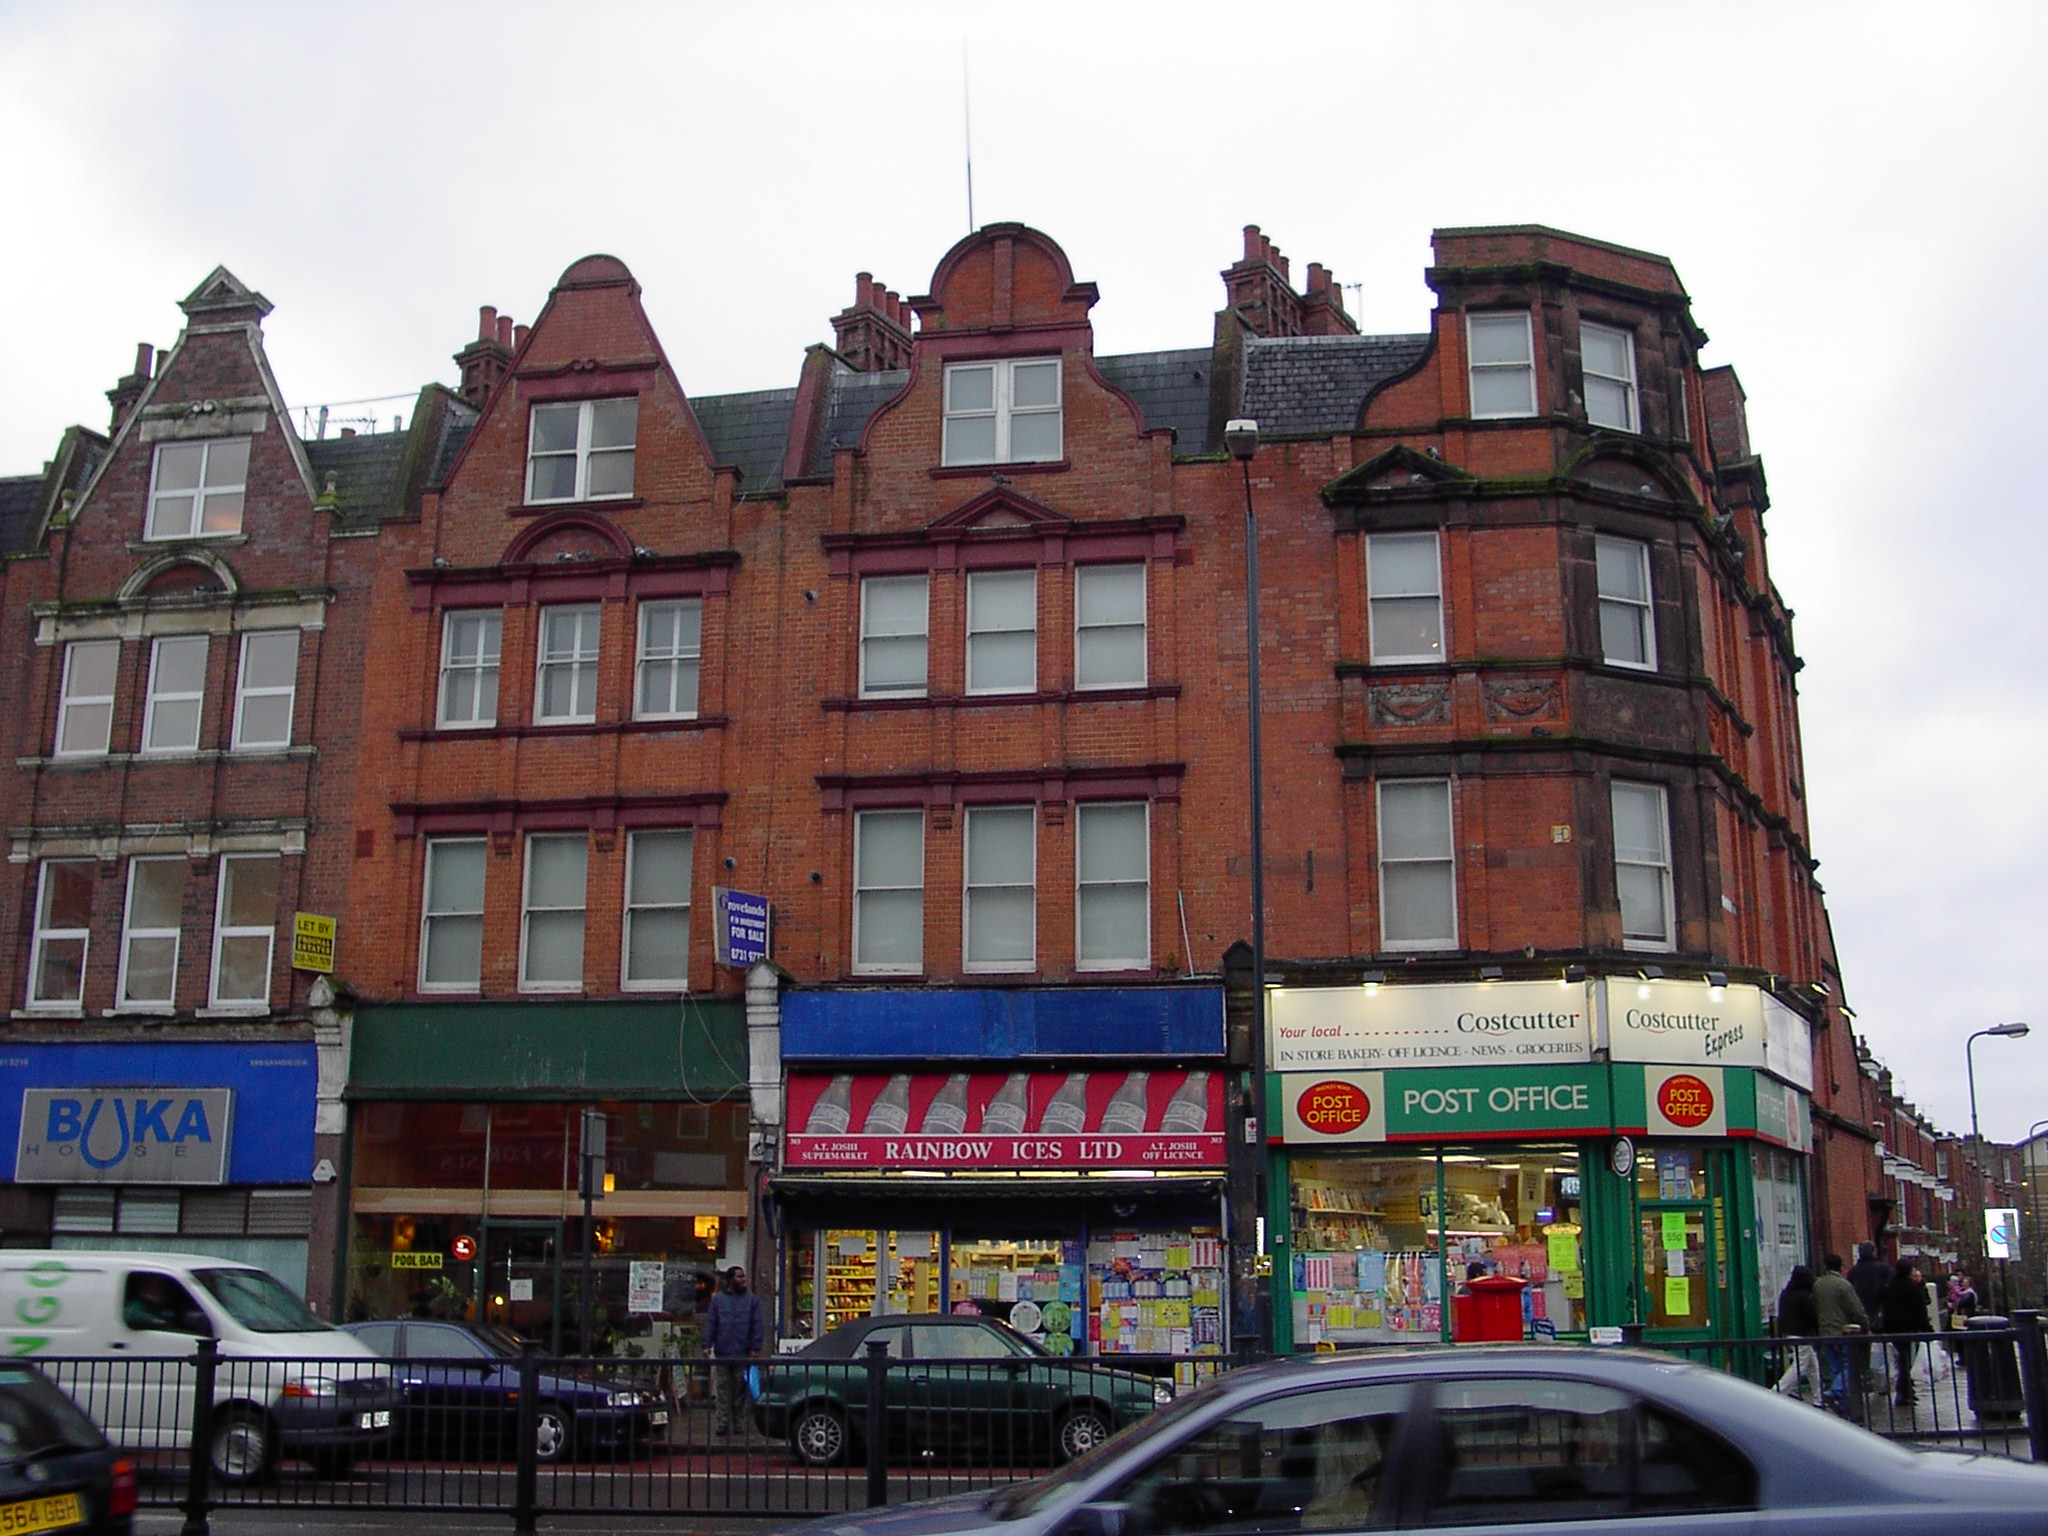 Finchley Road NW3